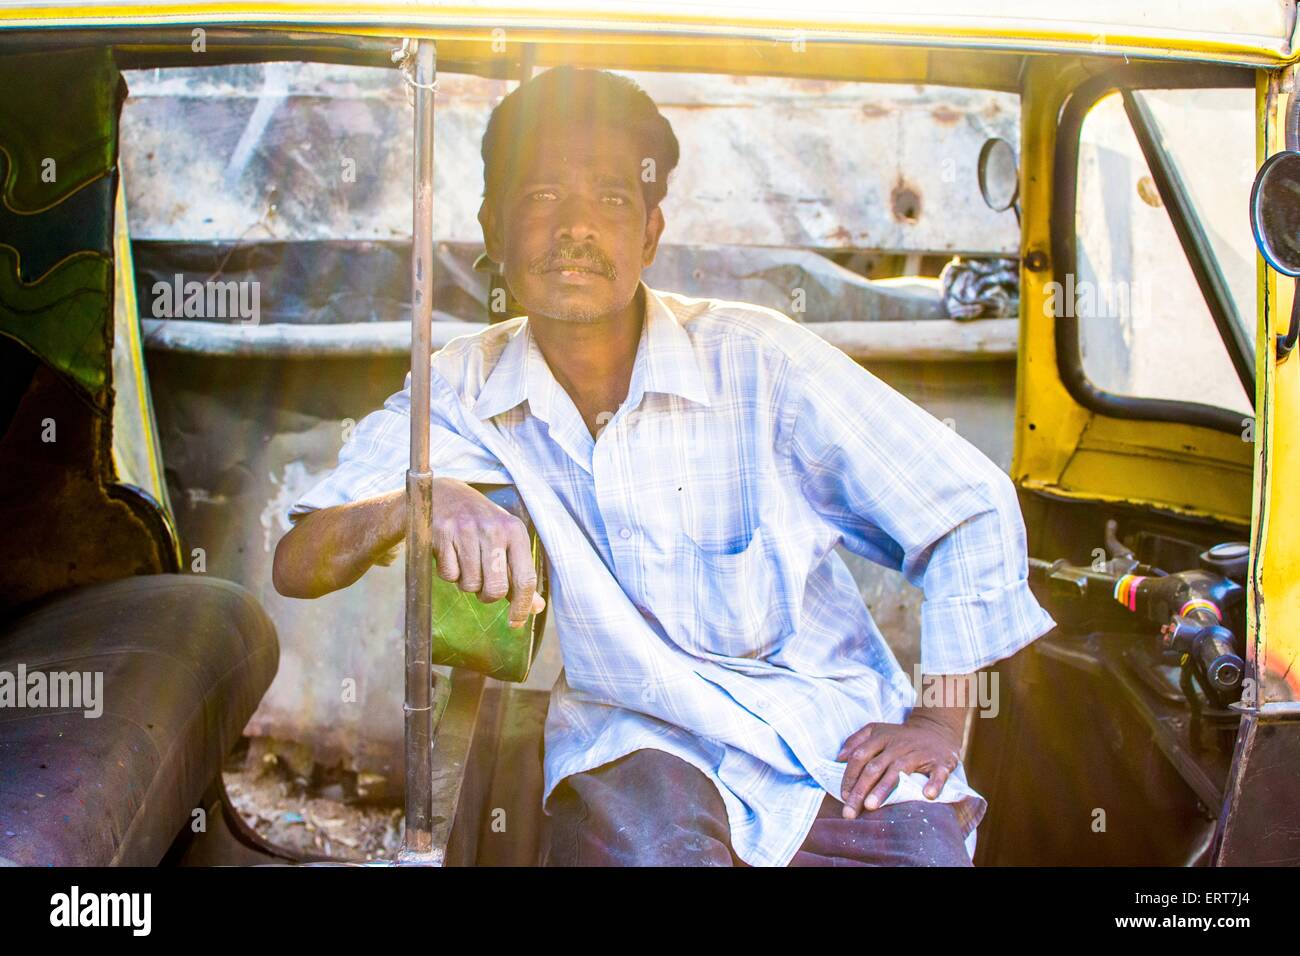 Portrait of an Indian man Stock Photo